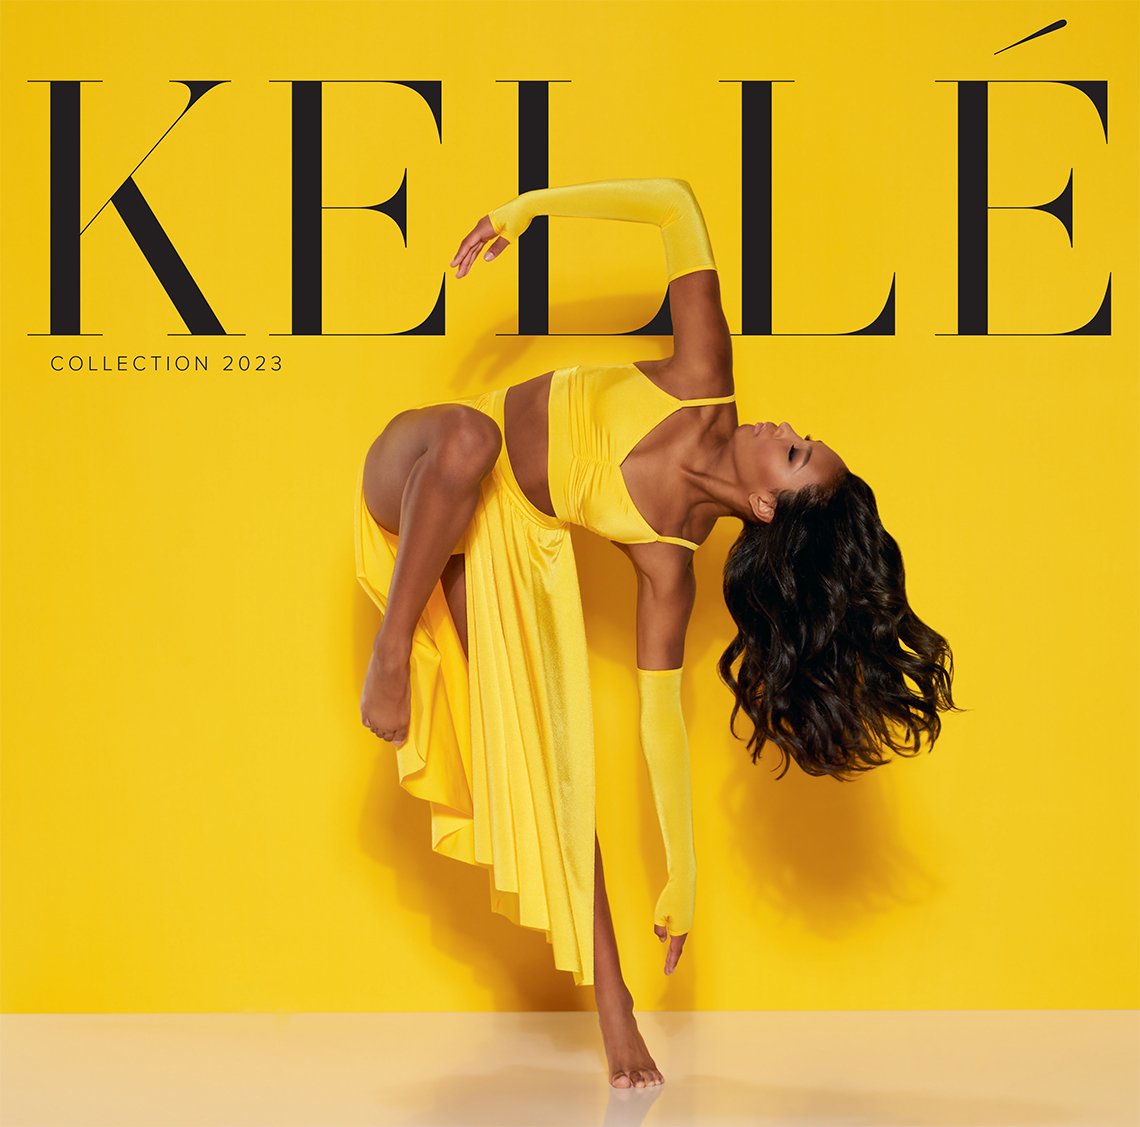 Kelle-Collection-2023-Cover_sfw